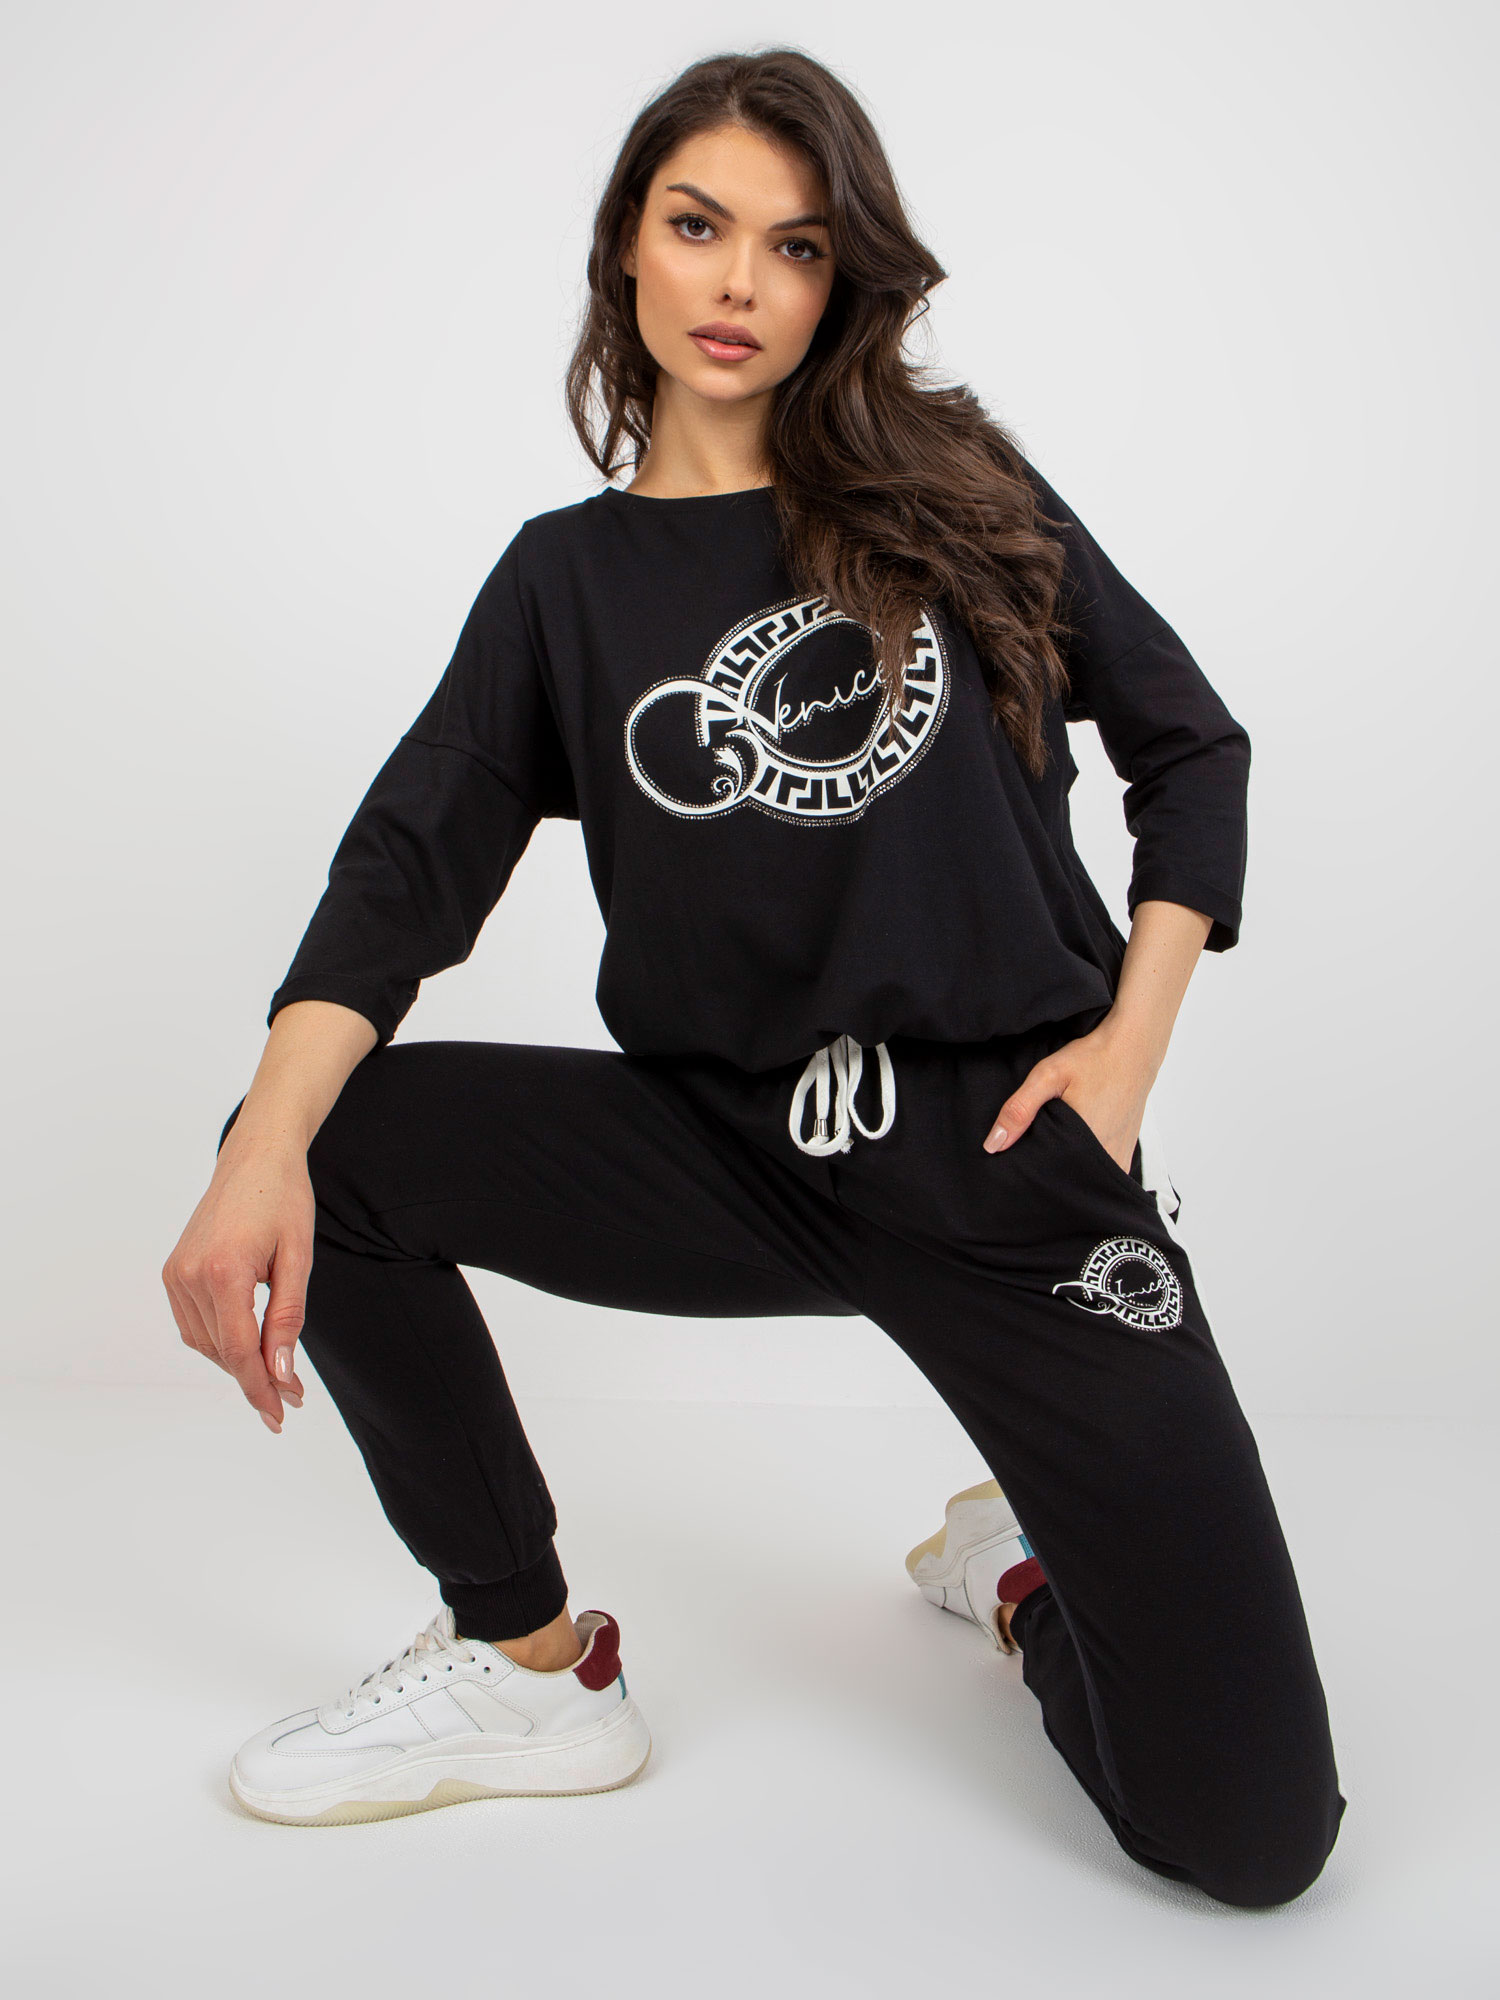 Black two-piece tracksuit with print